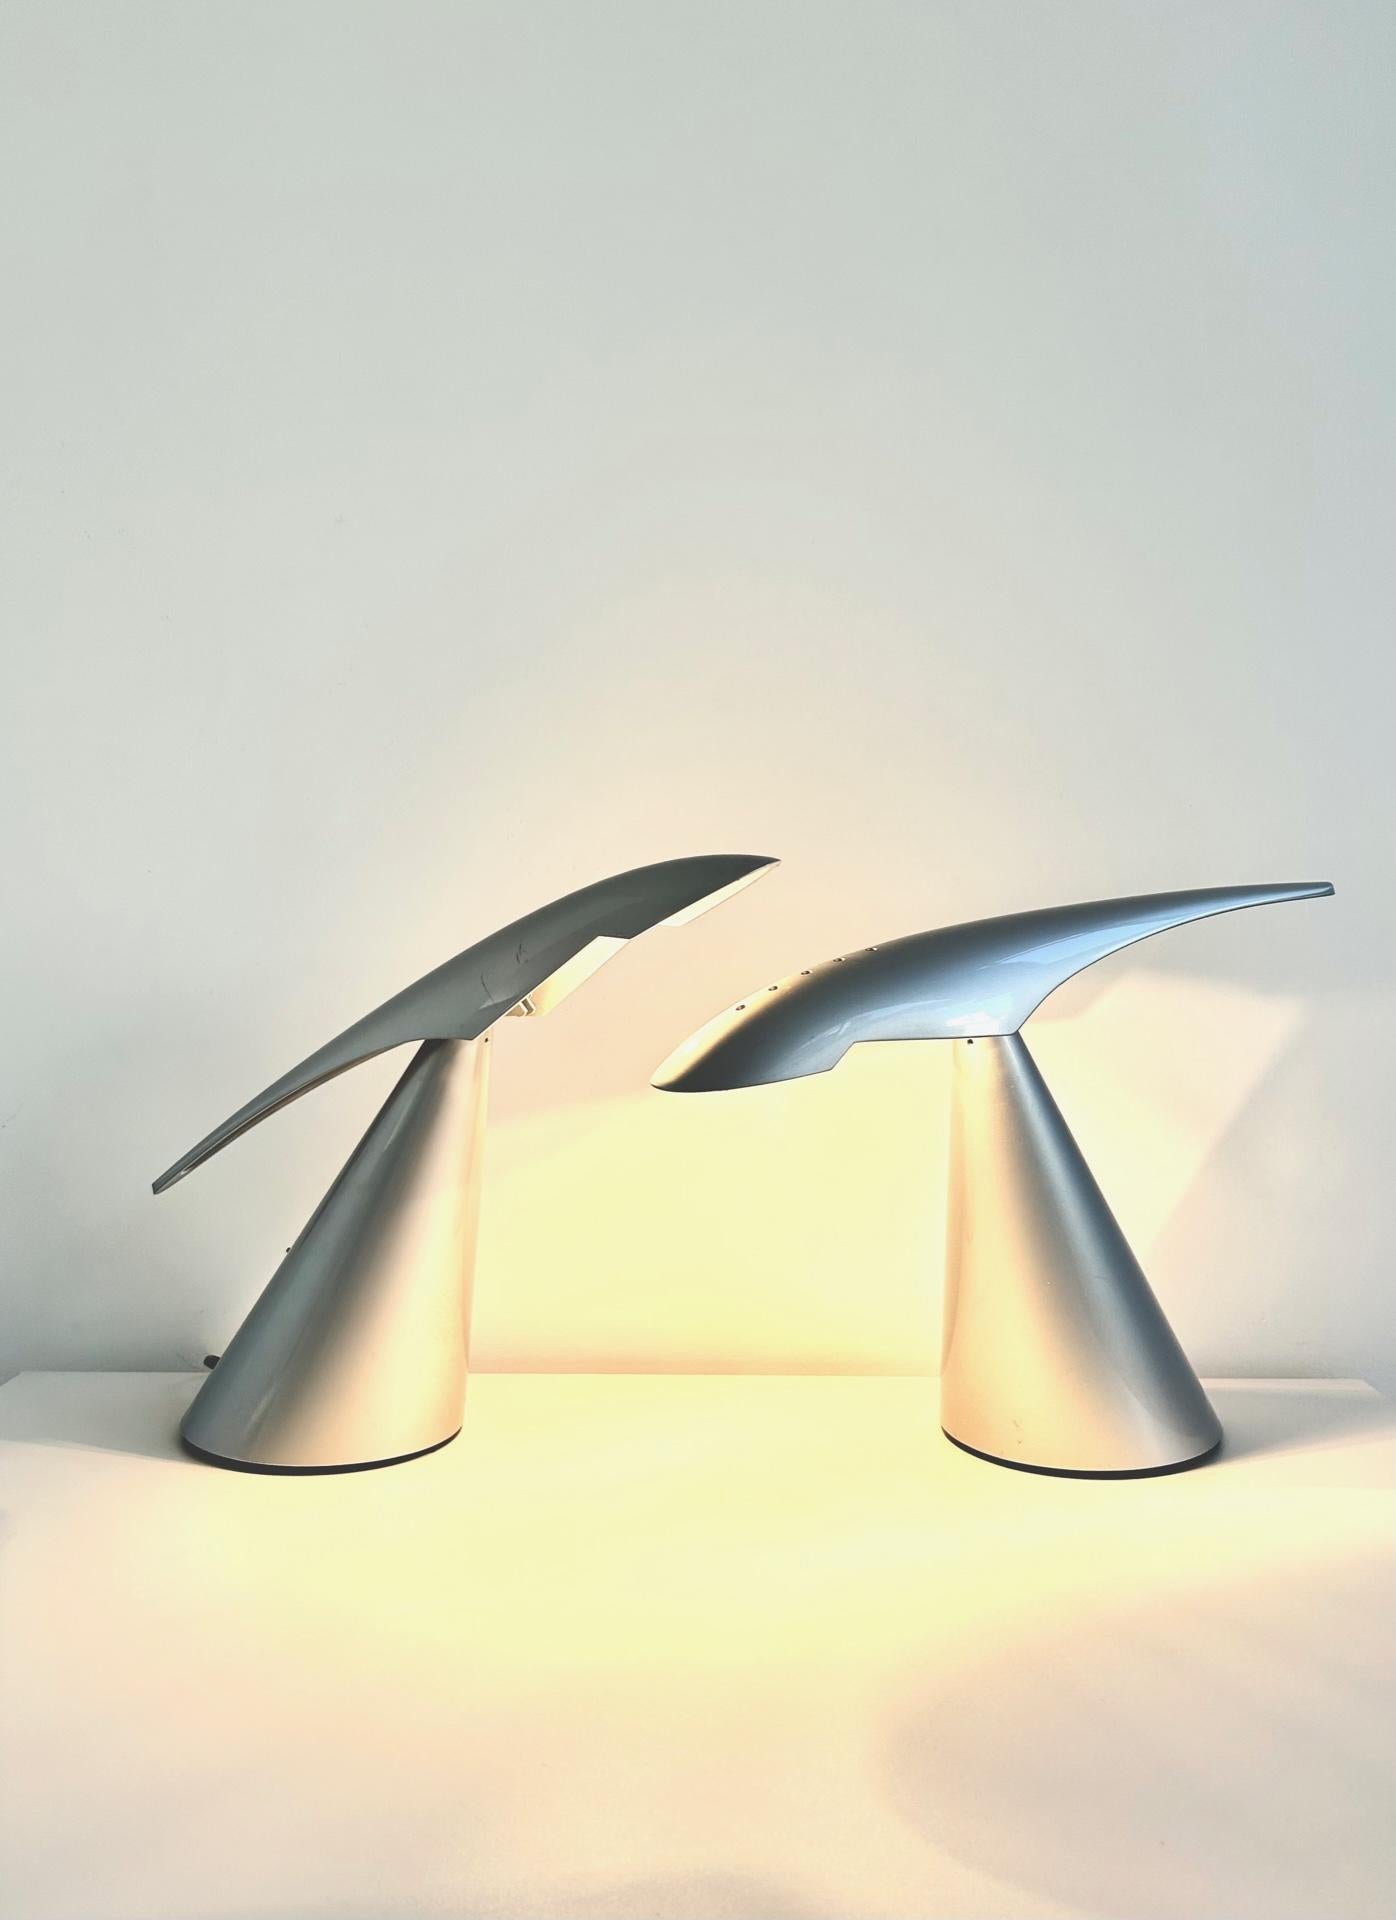 Pair of Ran Desk Lamps, Peter Naumann, ClassiCon, 1990s For Sale 2